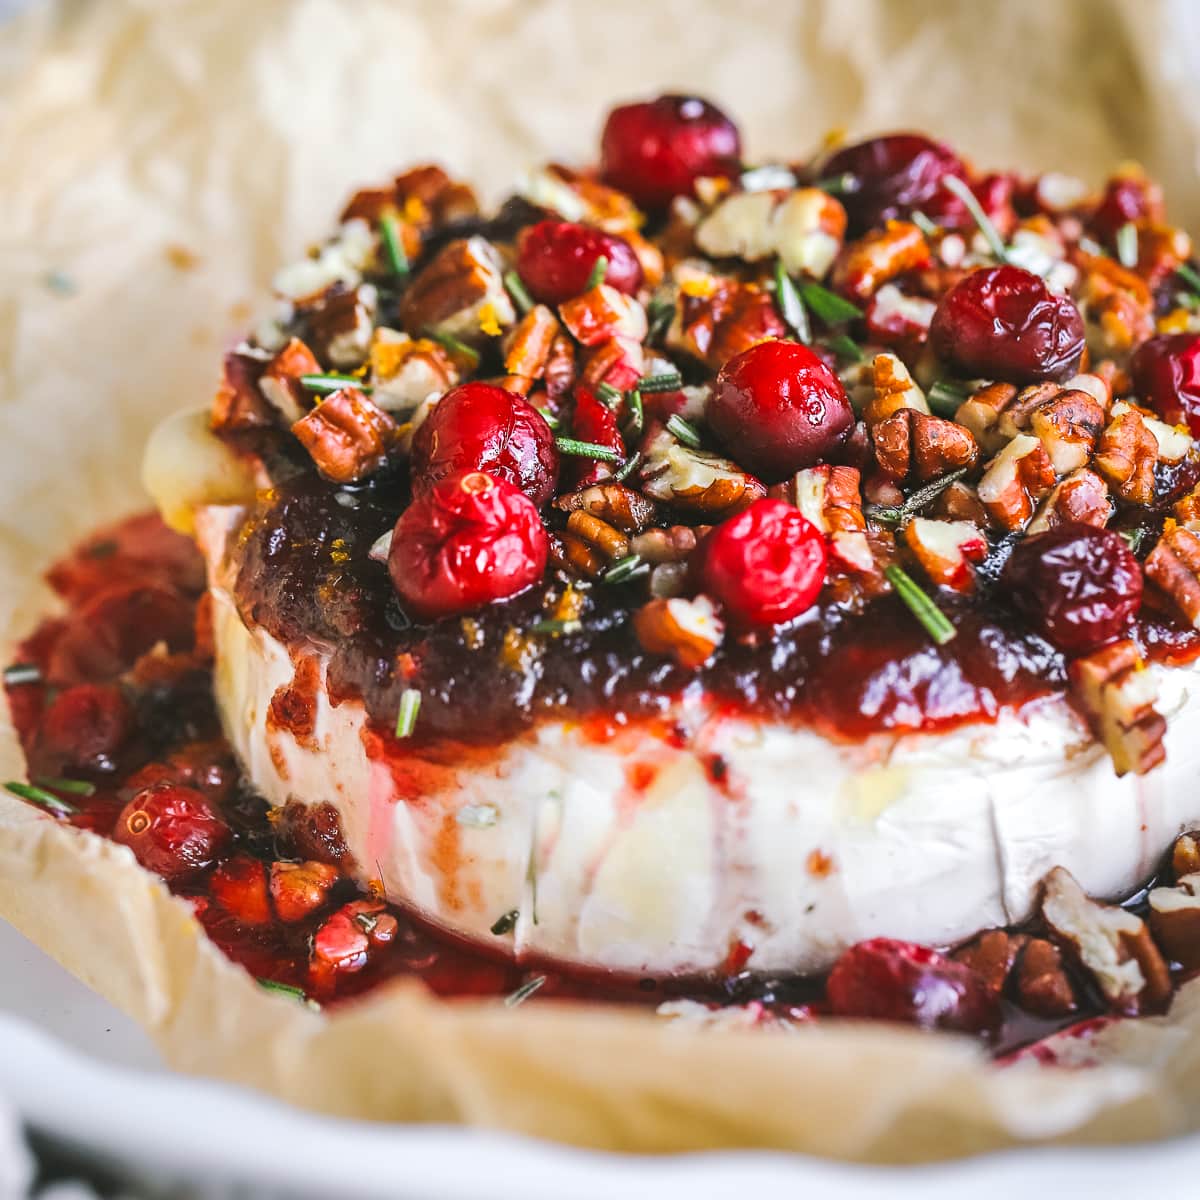 Warm Brie Appetizer with Cranberries and Walnuts